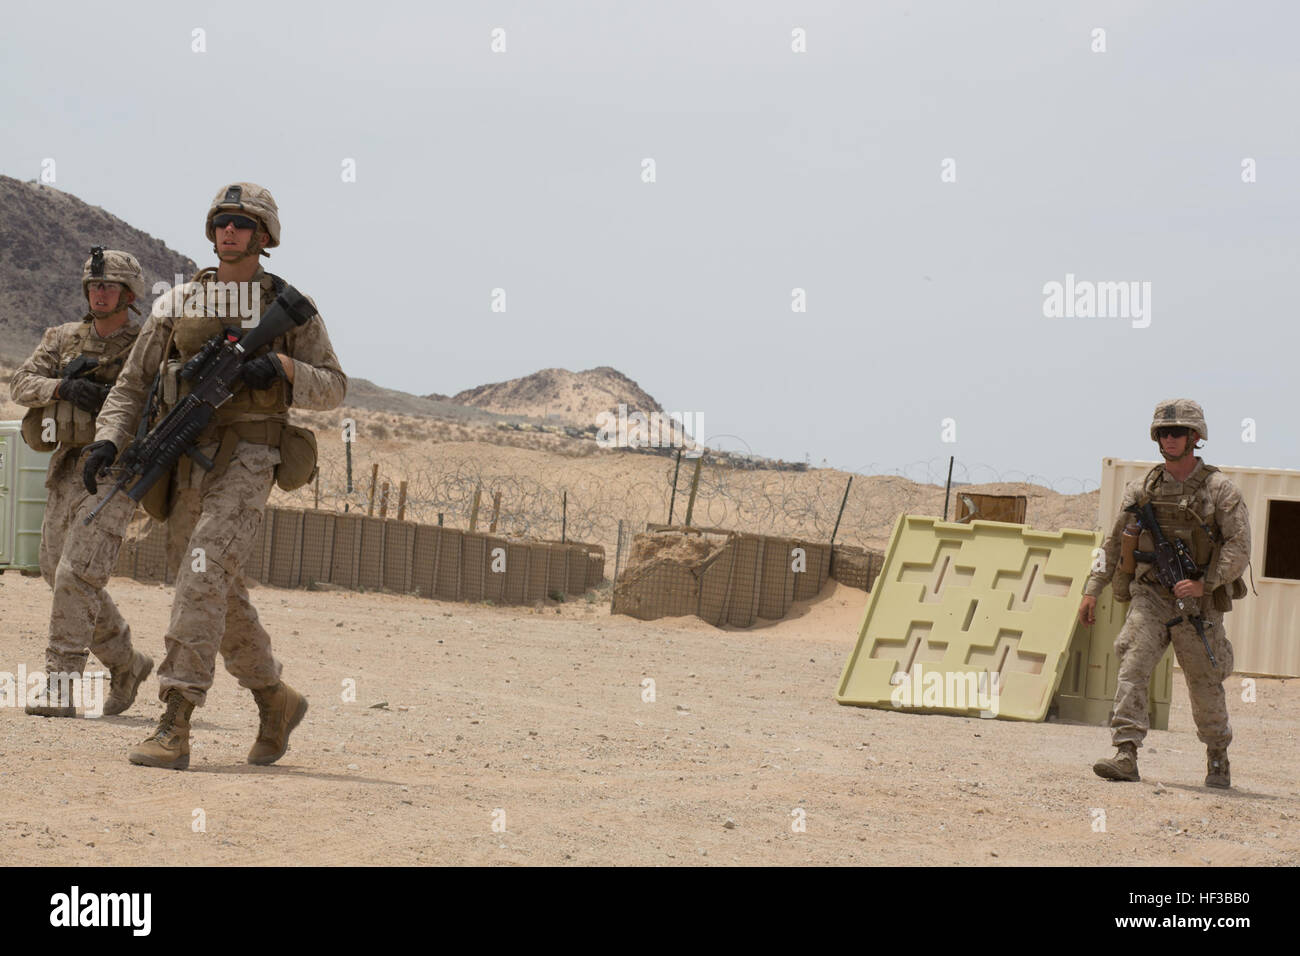 U.S. Marines with Kilo Company, 3rd Battalion, 8th Marines (3/8), conduct an embassy reinforcement during Integrated Training Exercise (ITX) 3-15 aboard Marine Corps Air Ground Combat Center Twentynine Palms, Calif., May 26, 2015. 6th Marines and subordinate units participated in ITX 3-15 to ensure all elements of Special-Purpose Marine Air Ground Task Force 6 (SPMAGTF-6) are prepared for upcoming deployments and operational commitments. (U.S. Marine Corps photo by Staff Sgt. Keonaona C. Paulo 2D MARDIV Combat Camera/Released) ITX 3-15 150526-M-EF955-404 Stock Photo